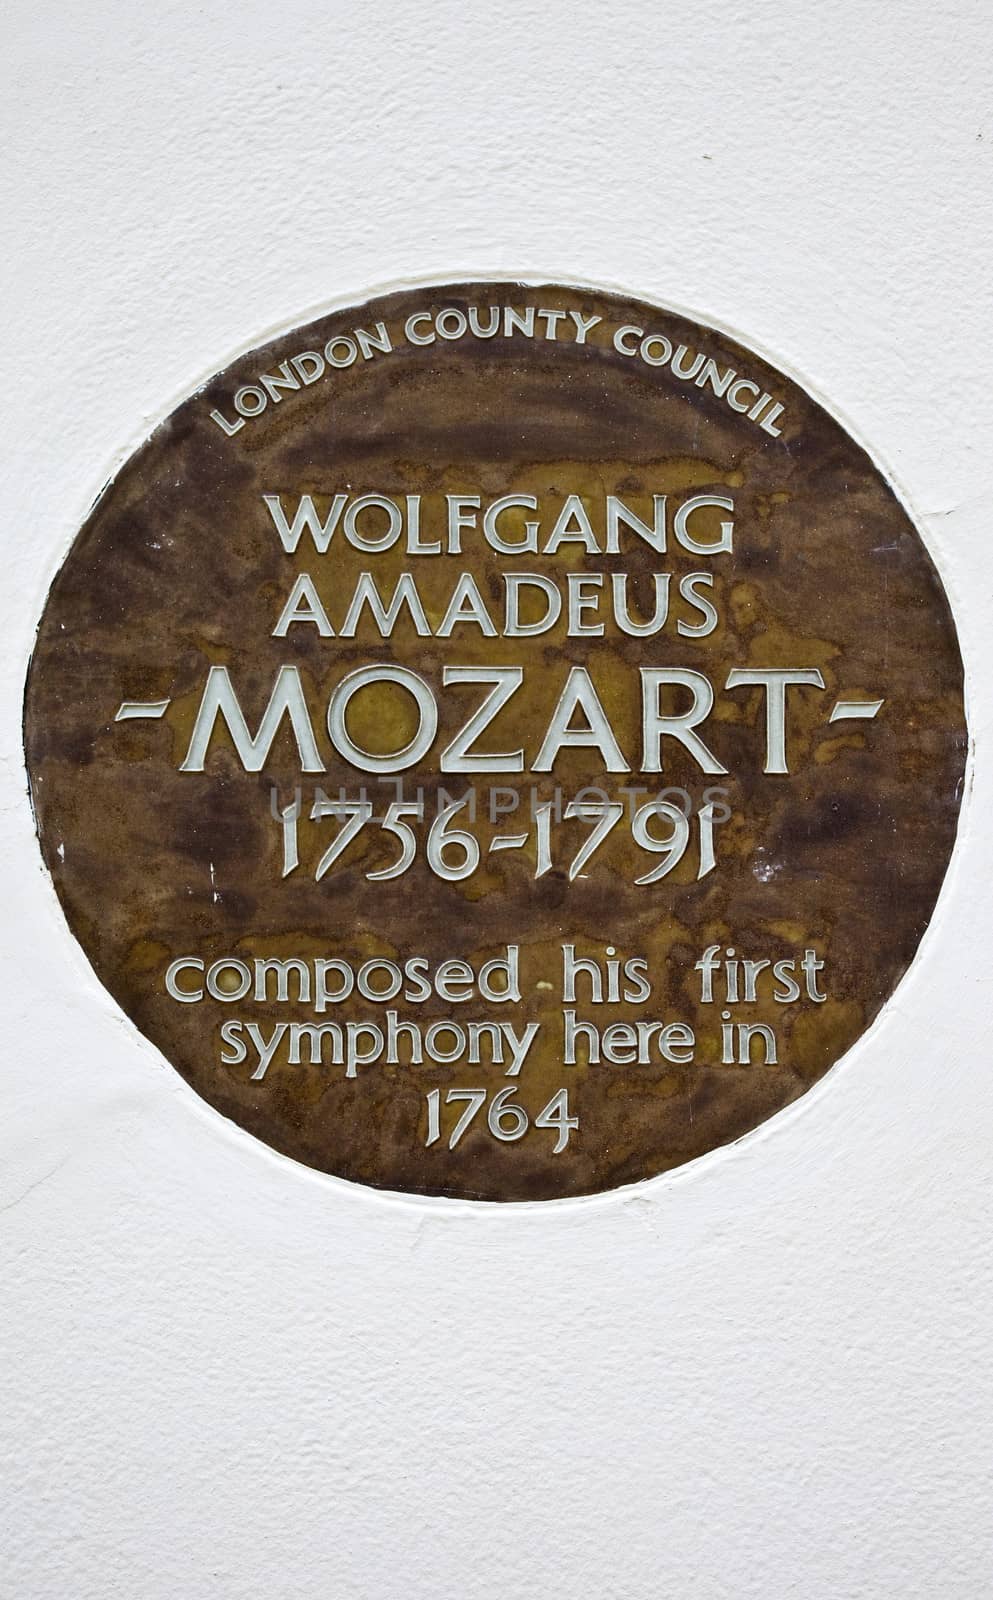 LONDON, UK - JUNE 4TH 2013: A plaque in London marking the place where Wolfgang Amadeus Mozart composed his first symphony.  Taken in Belgravia, London on 4th June 2013.